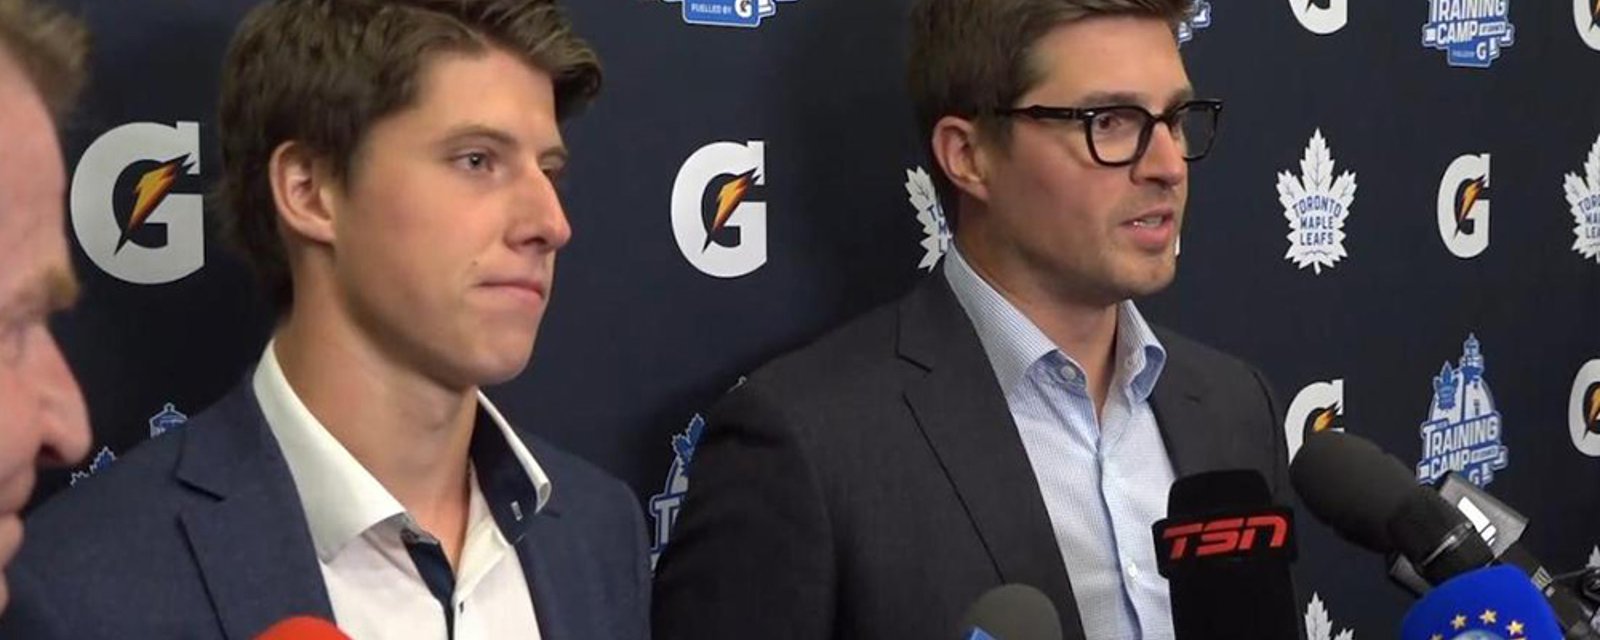 Maple Leafs GM Kyle Dubas comes to the defense of Mitch Marner